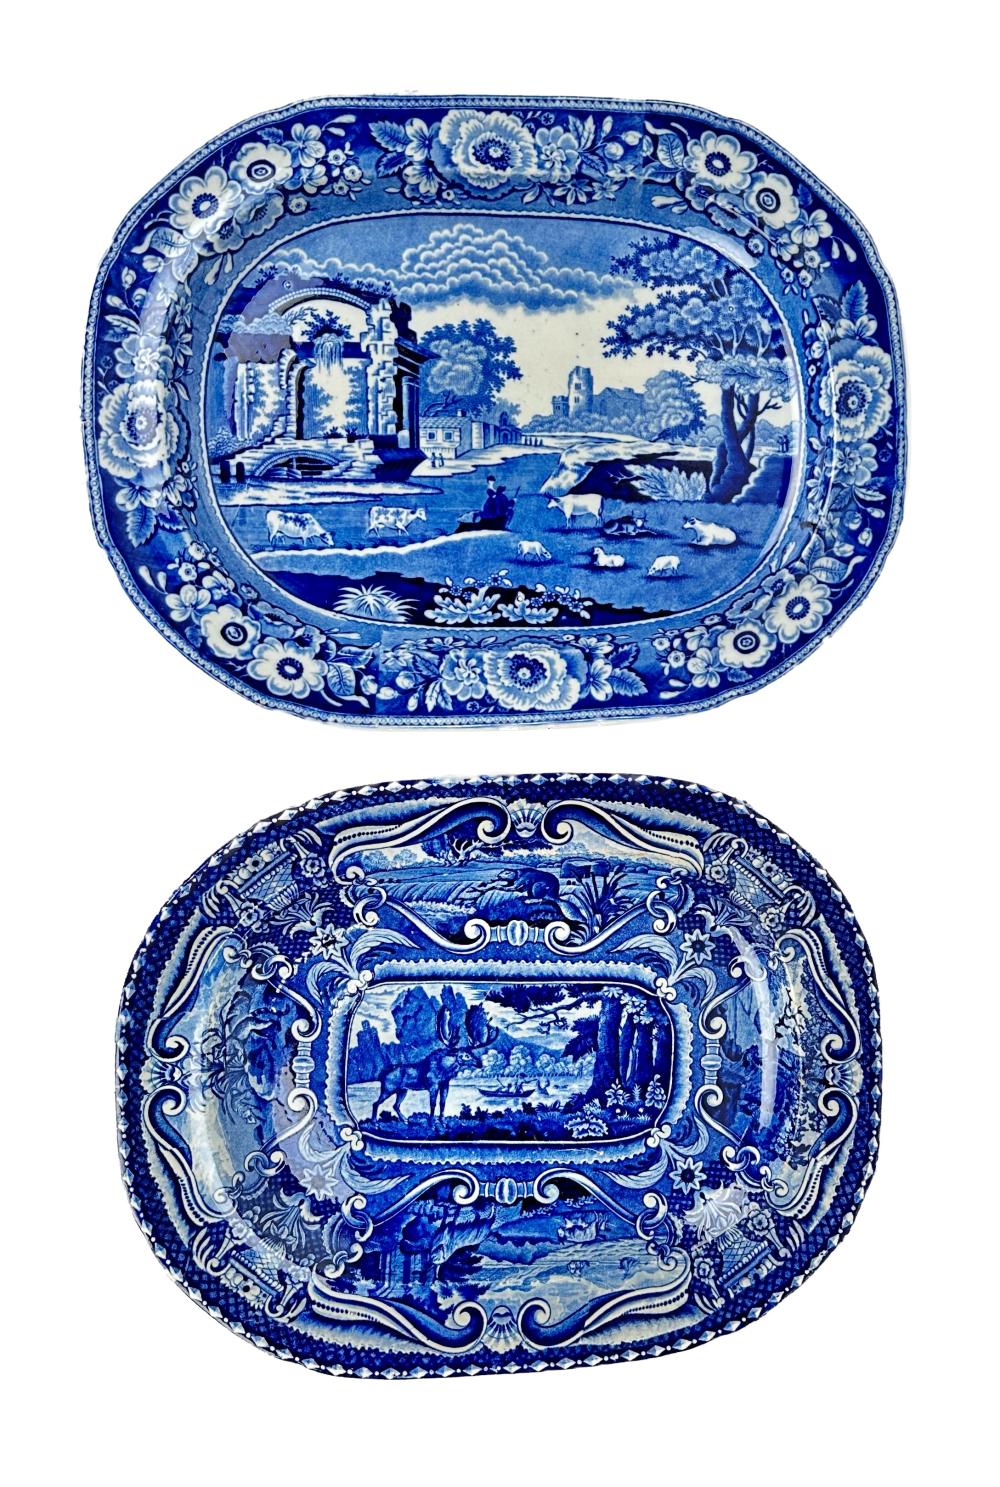 TWO BLUE STAFFORDSHIRE PLATTERS